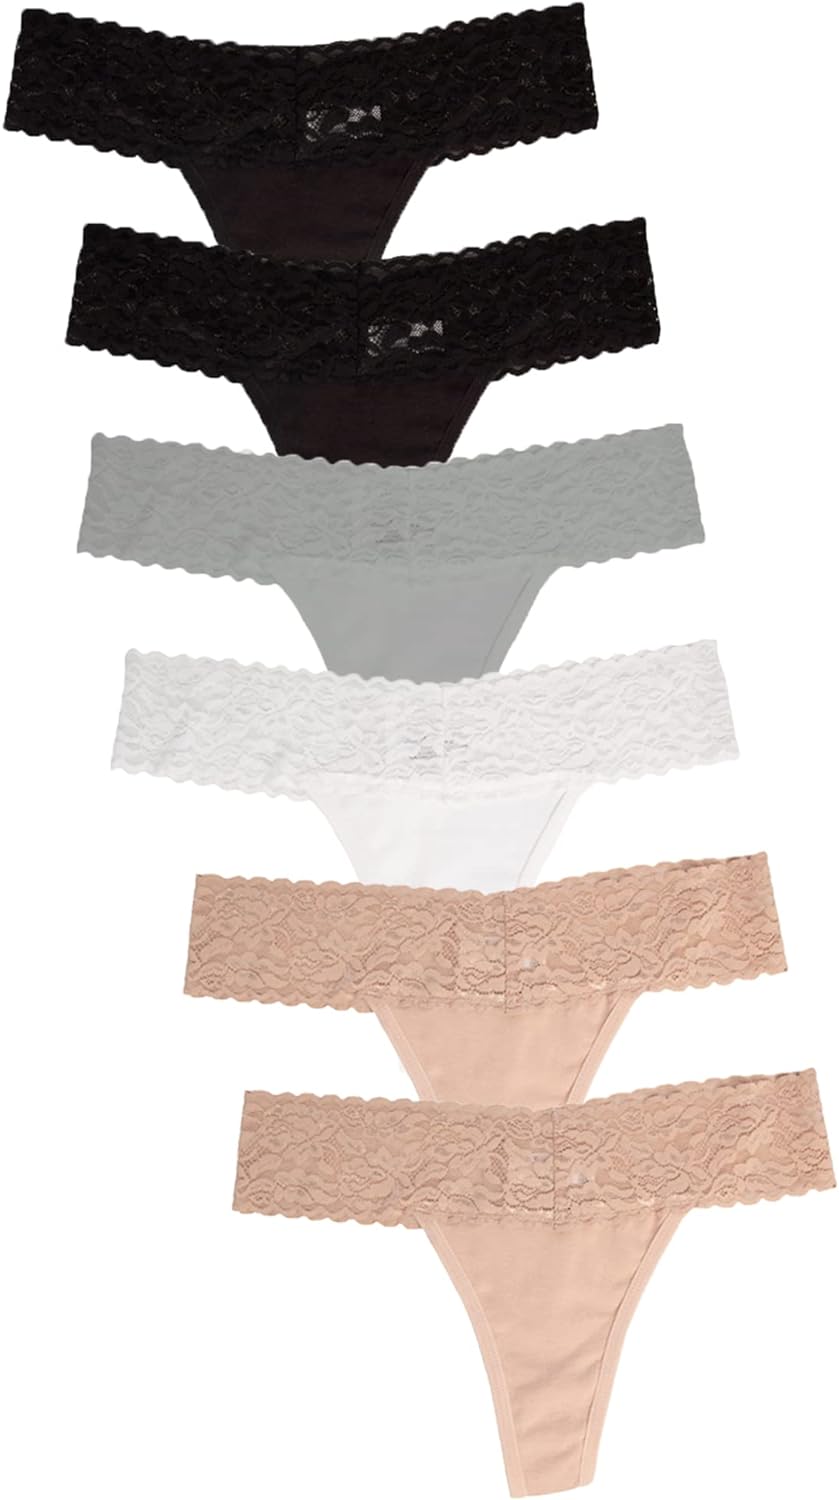  Hanes Womens Panties Pack, Classic Cotton Brief